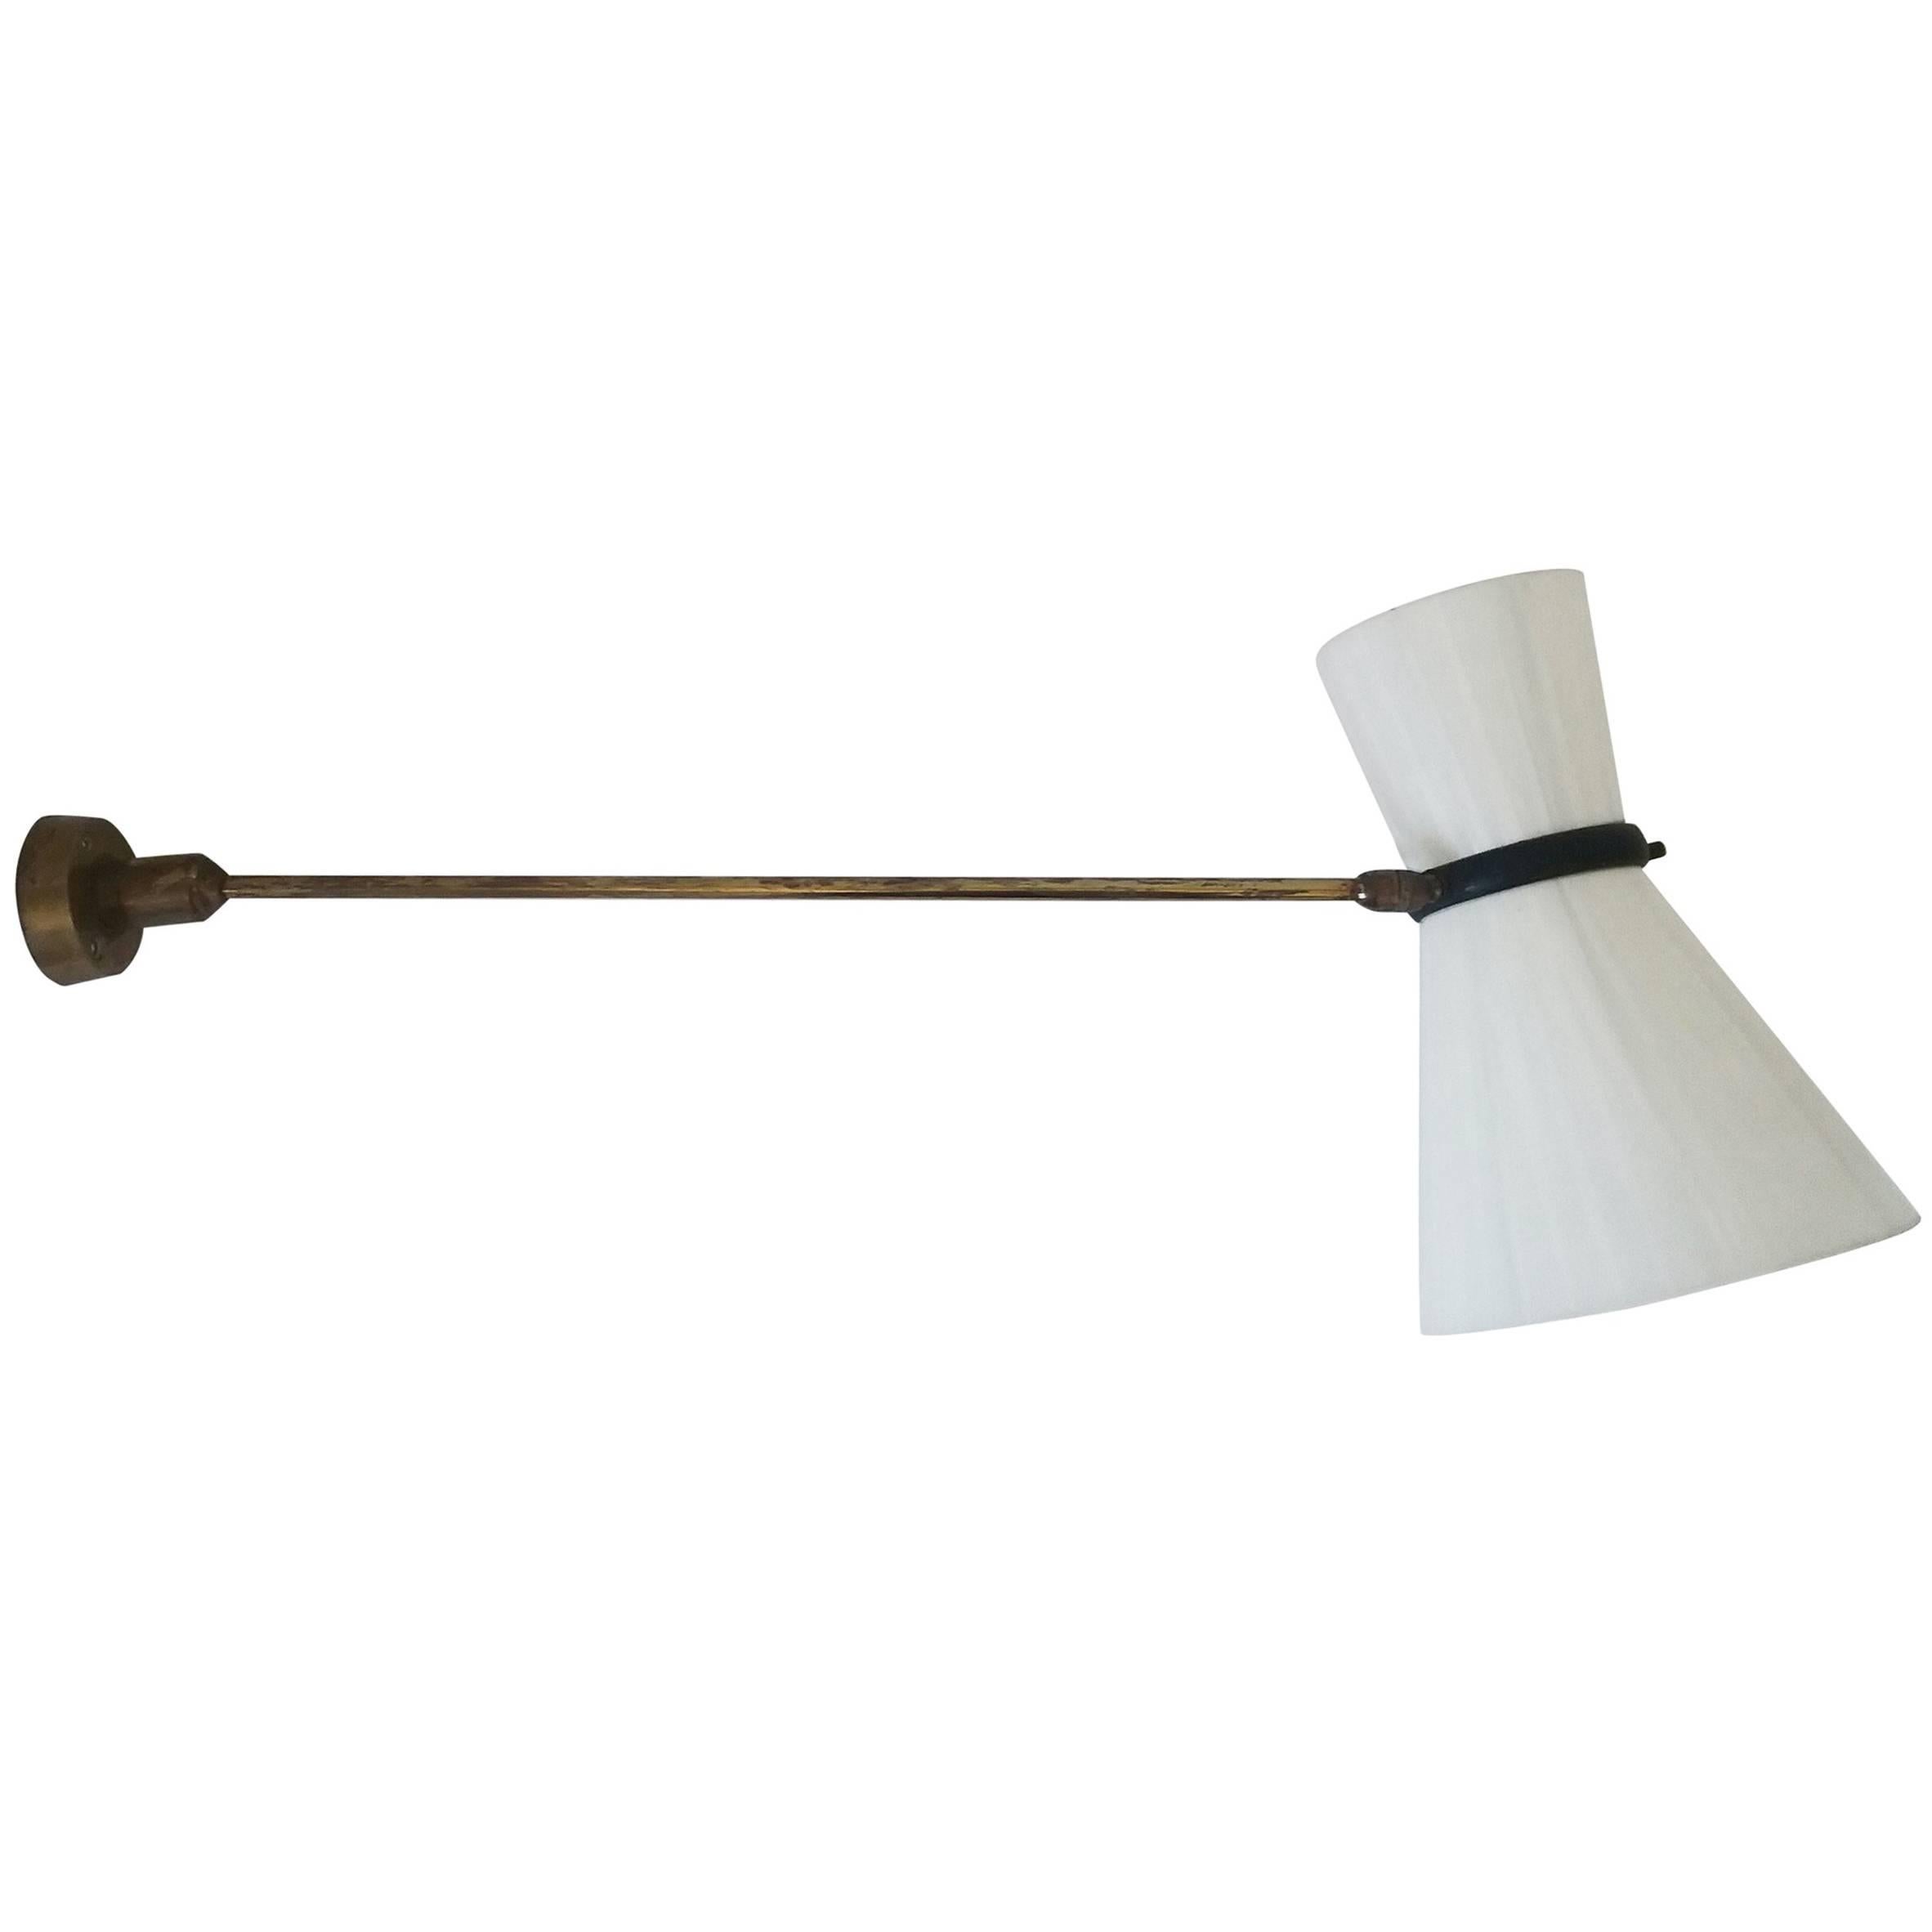 1950s Rare Swing Arm Wall Lamp Designed by Maurice Flachet French Decorator For Sale